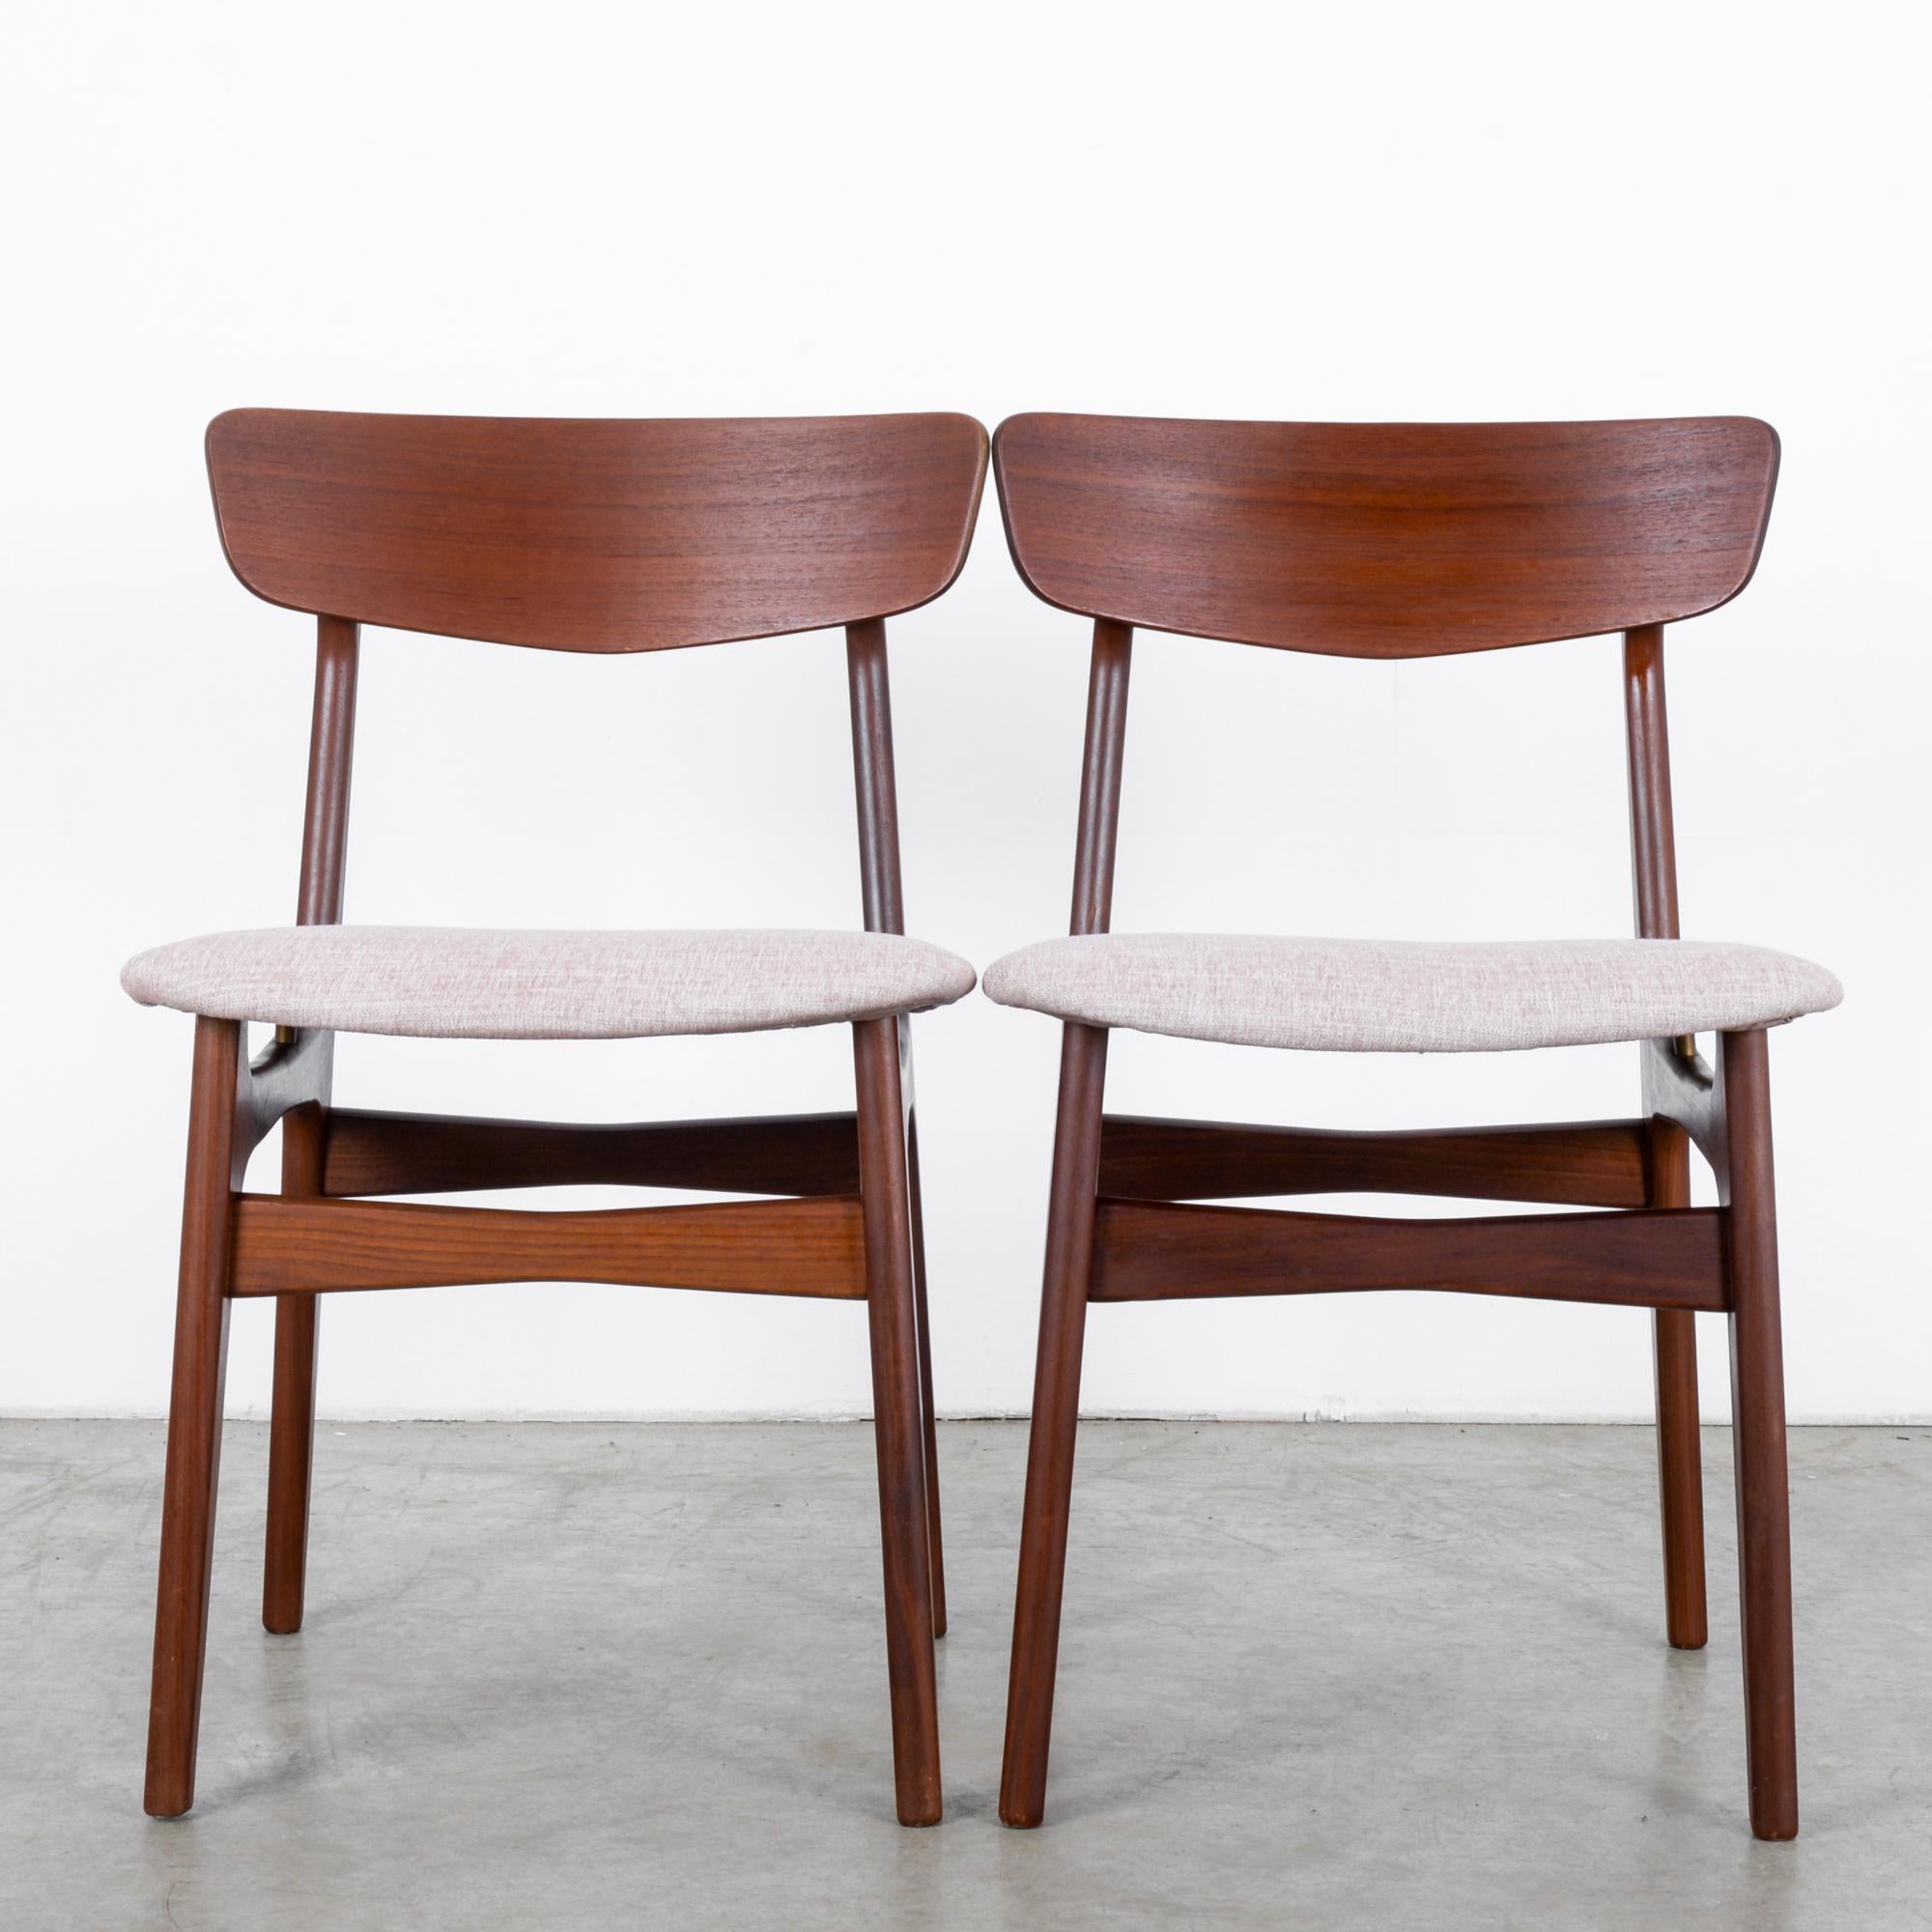 This pair of teak chairs by Glostrup was made in Denmark, circa 1960. The chairs are supported on tapered legs and feature a curved backrest. Details such as the slight narrowing of the stretchers in the middle add refinement. Pale ash pink